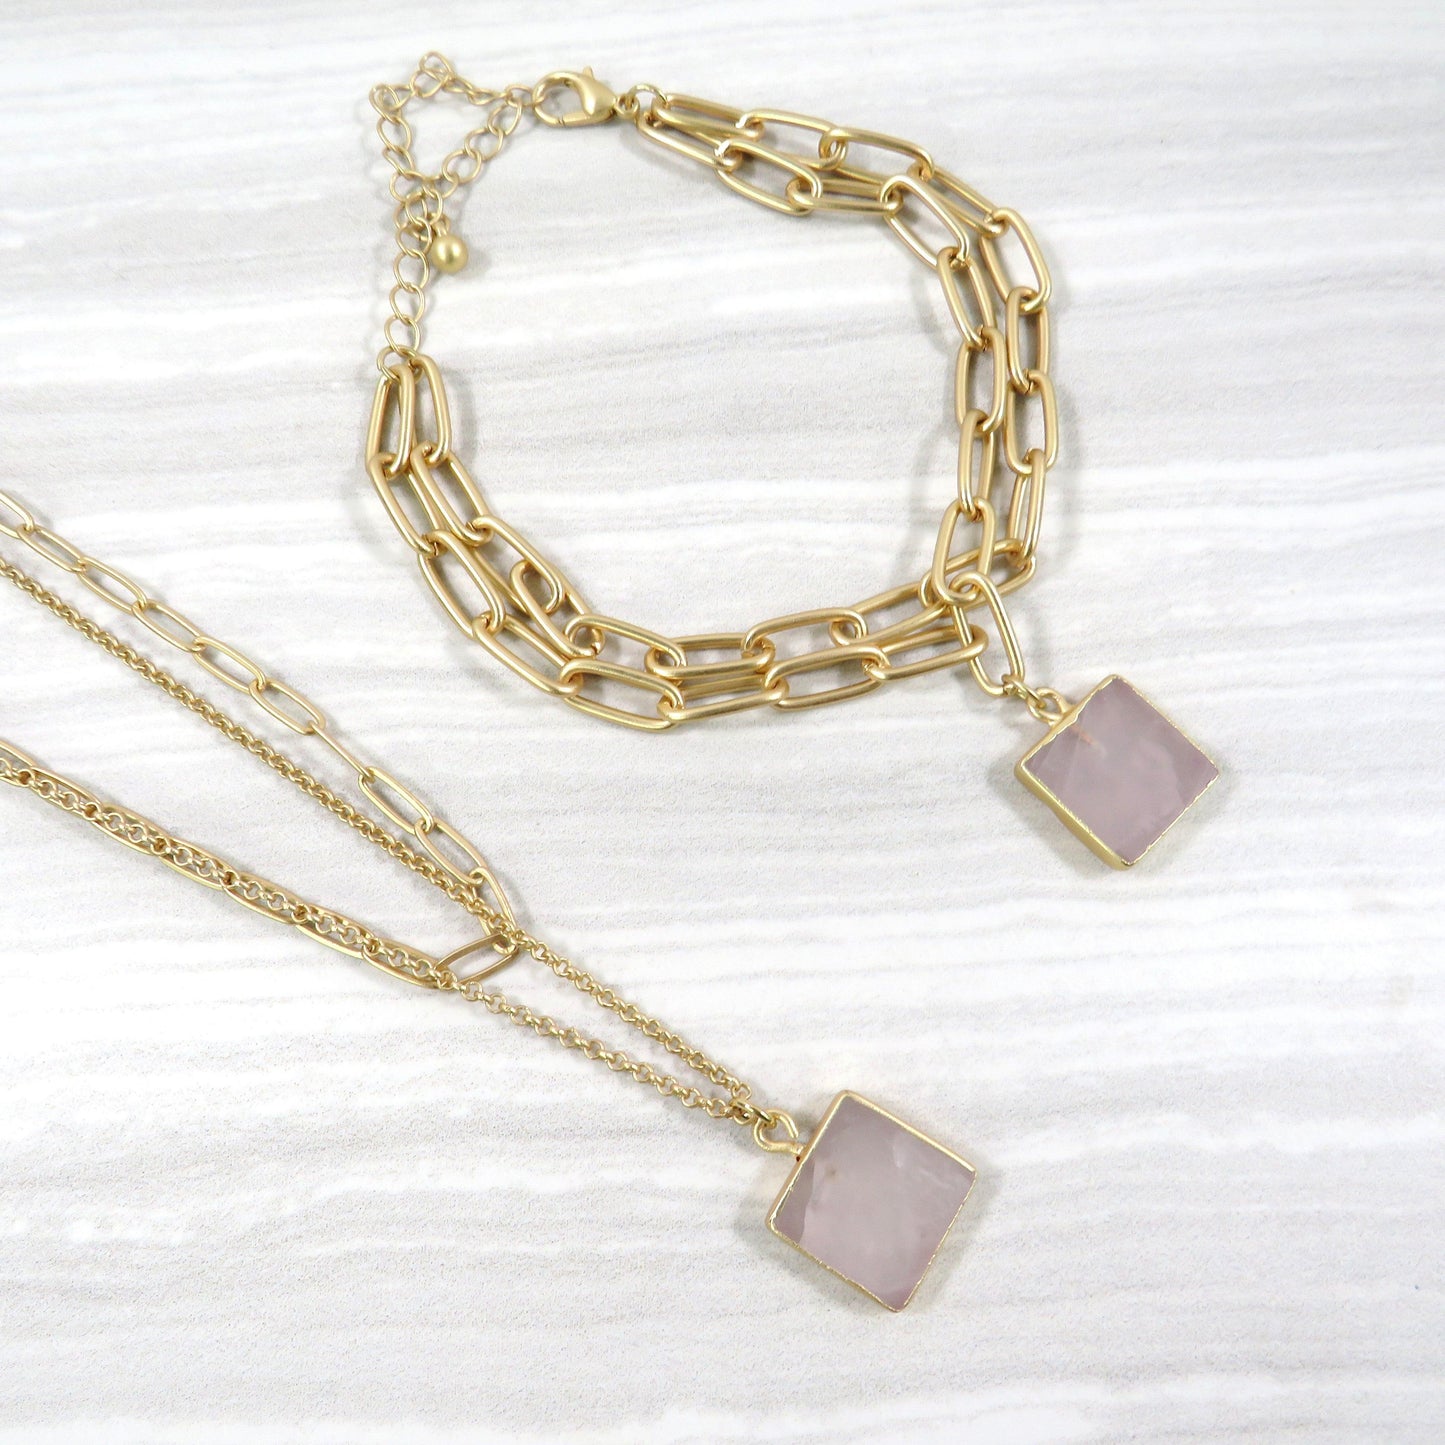 double layer gold chain necklace and bracelet set with a square rose quartz stone on a gray and white tile background